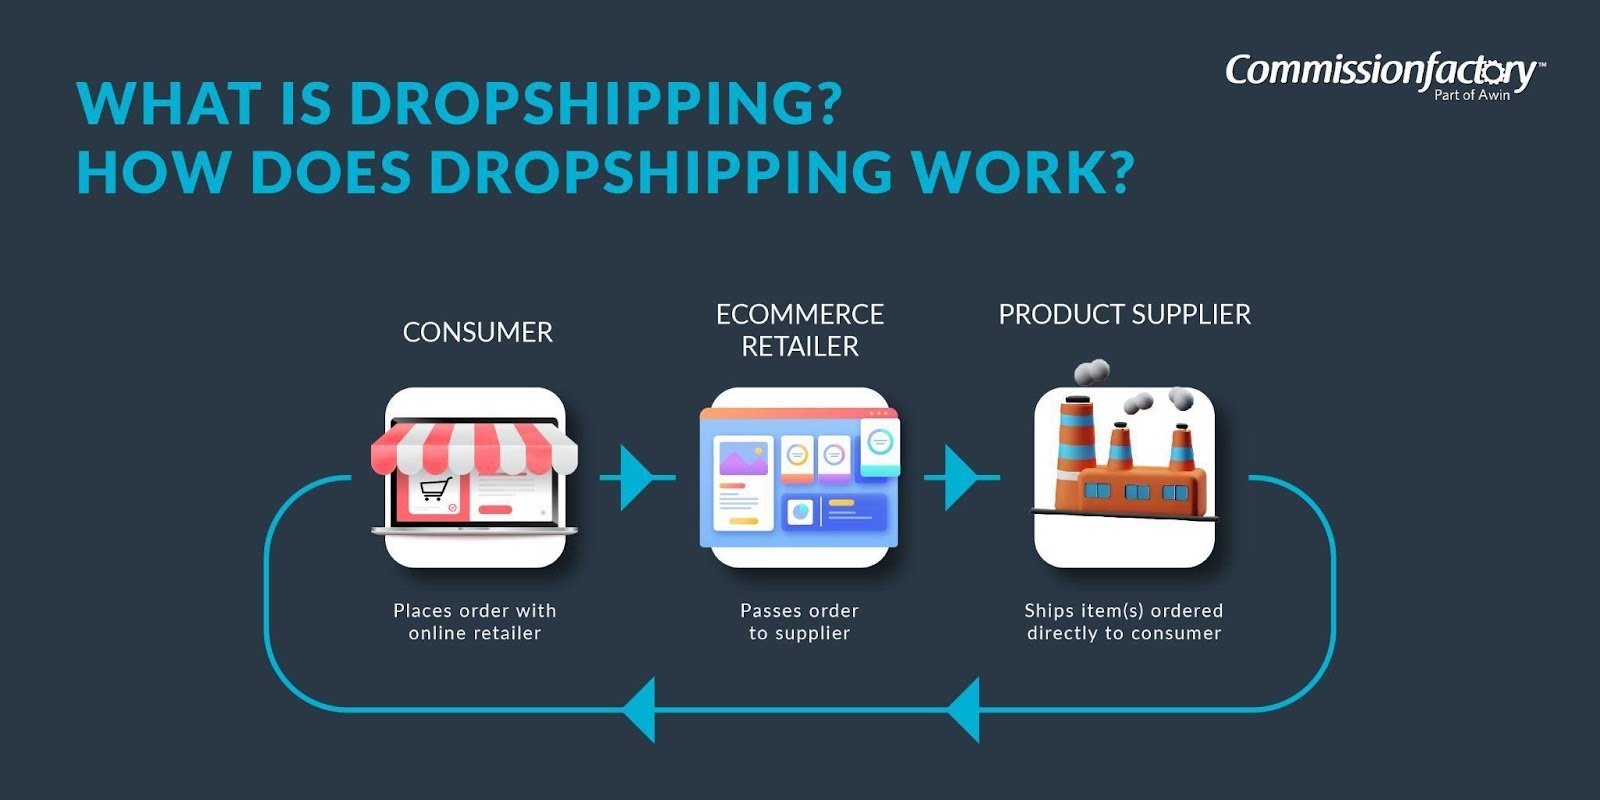 How To Find Dropshippers On  (5 Methods) - The Best